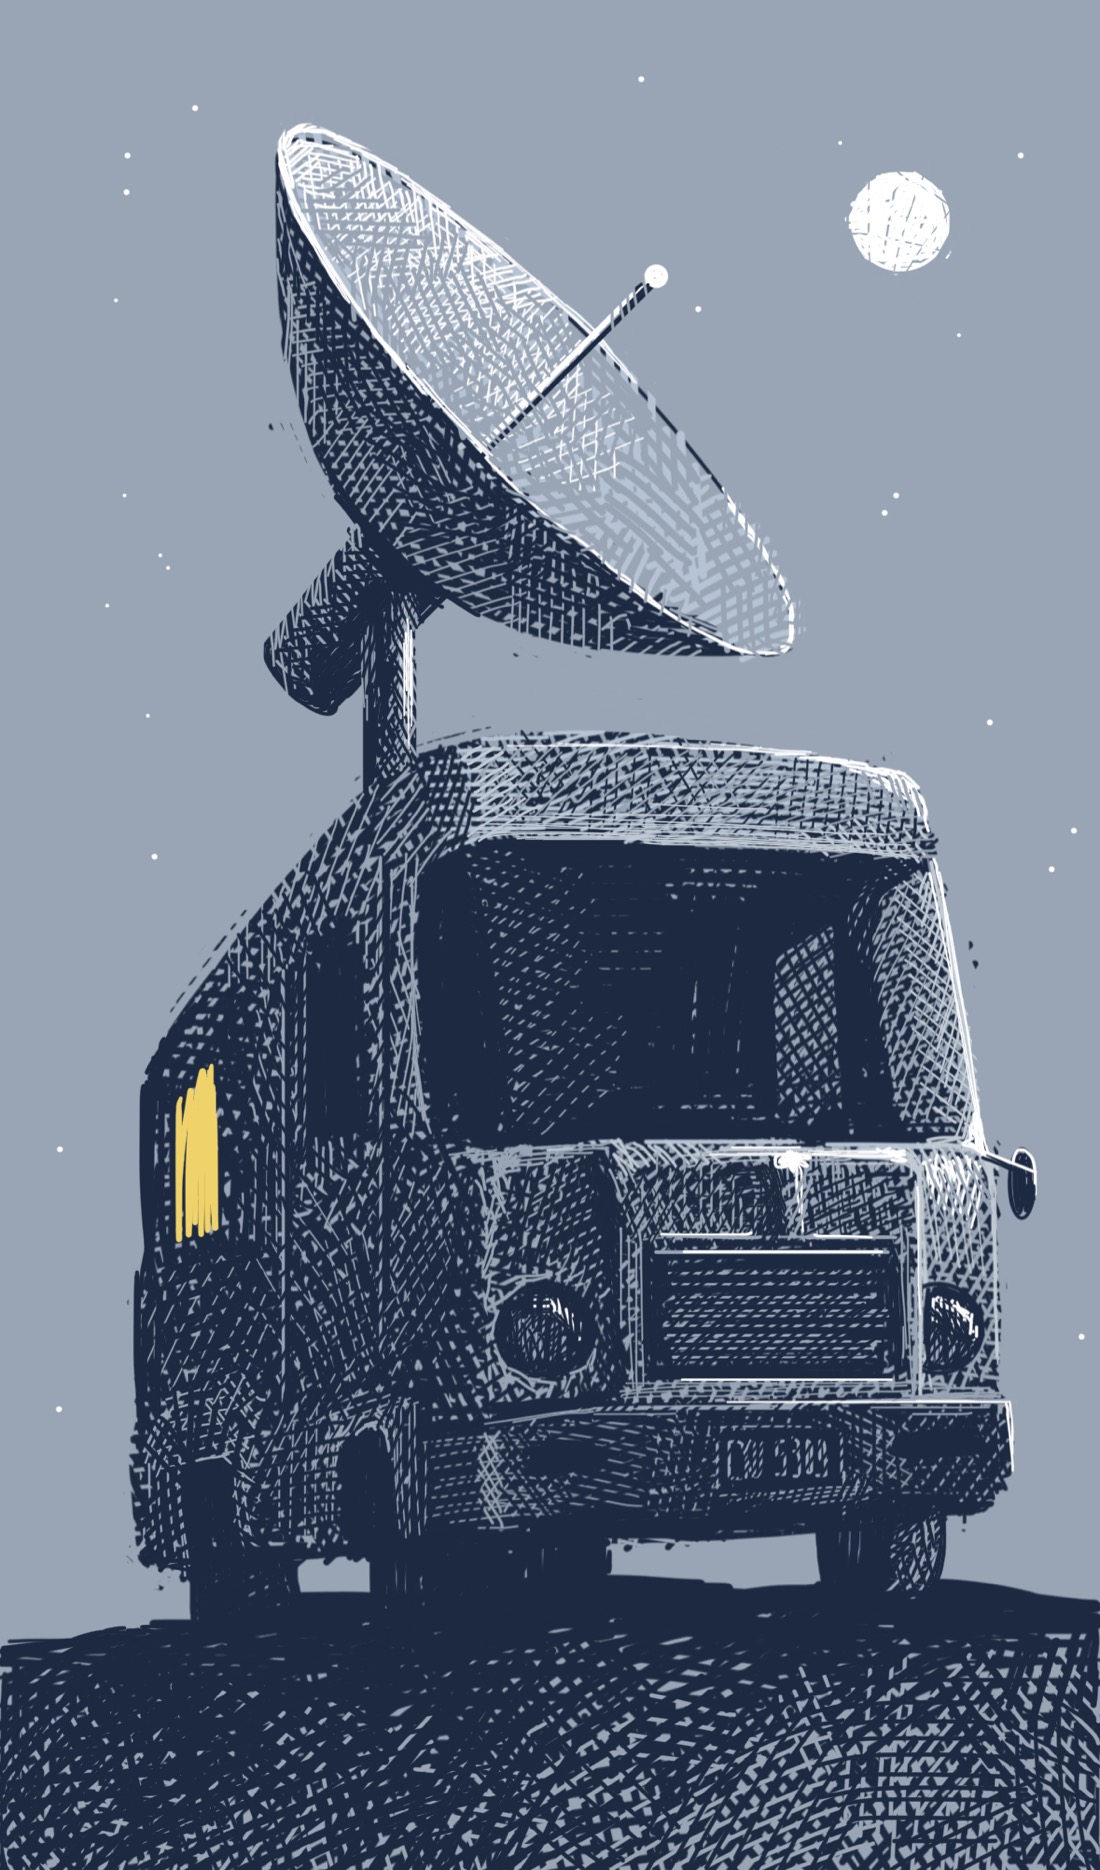 A night scene, with a starry sky. A van, seen from the front, sits in an open area, not moving, lights out. On top of the van is a giant satellite dish, pointed skyward towards a full moon. No one is visible in the van, but there is a lit window at the rear of the van, suggesting someone is home and maybe controlling the dish.